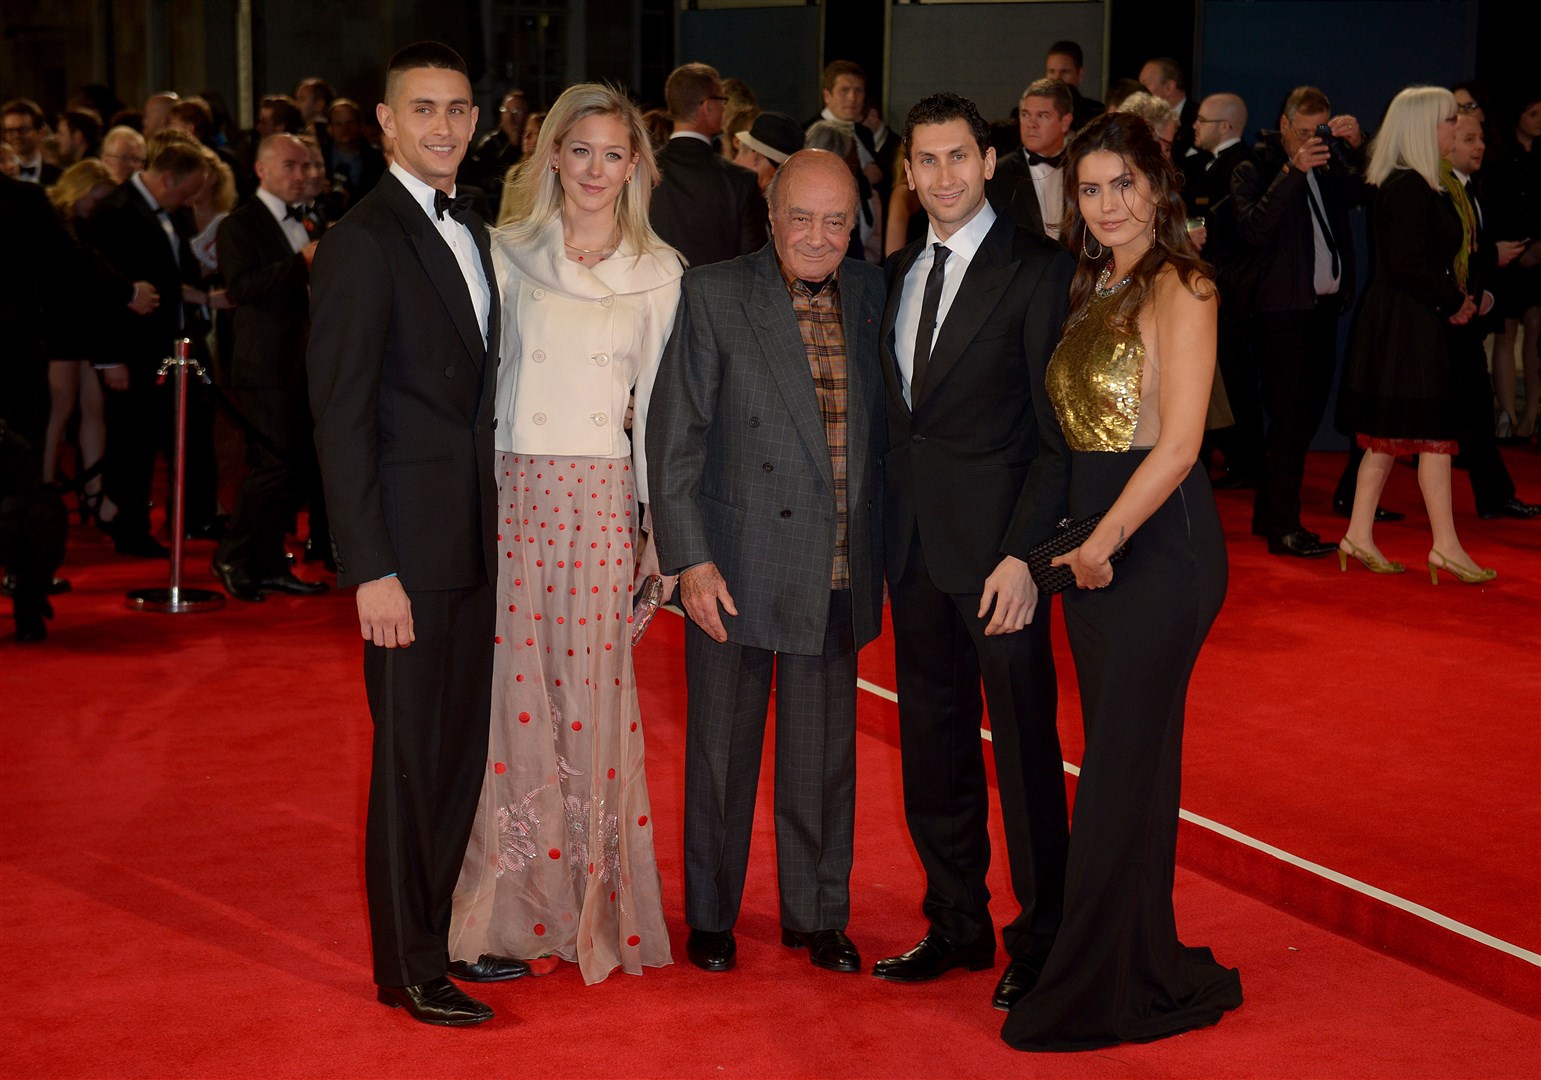 Mohamed Al-Fayed and family attending a film premiere of Spectre (Anthony Devlin/PA)